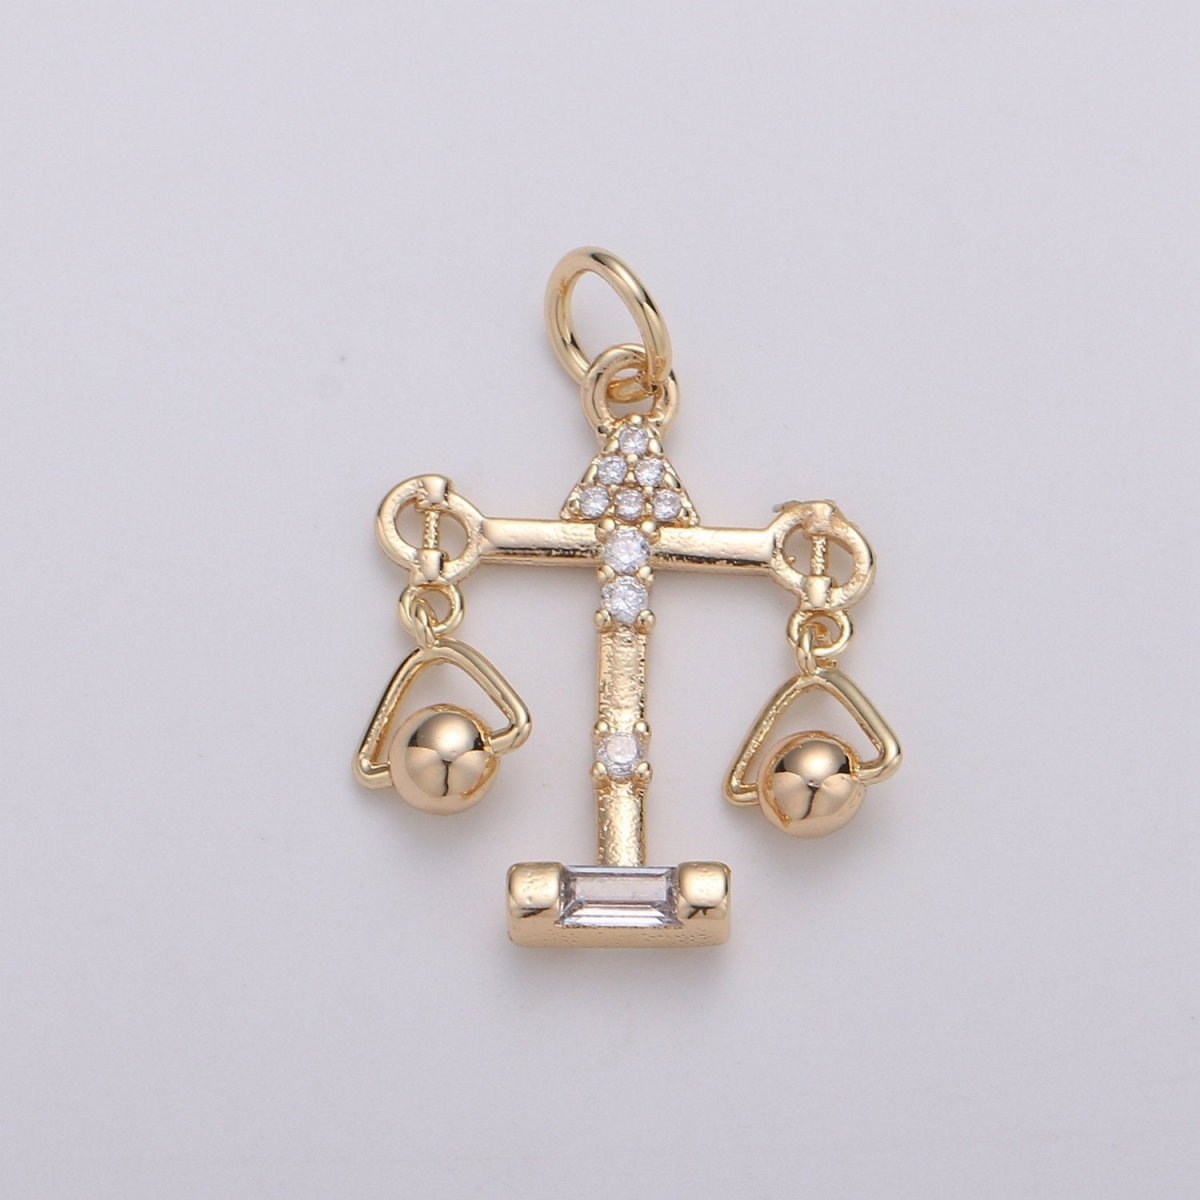 18k Gold Filled Zodiac Sign Charm, Dainty Libra Scales Sign Astrology Pendant Charm for Necklace Earring Supply D-740 - DLUXCA